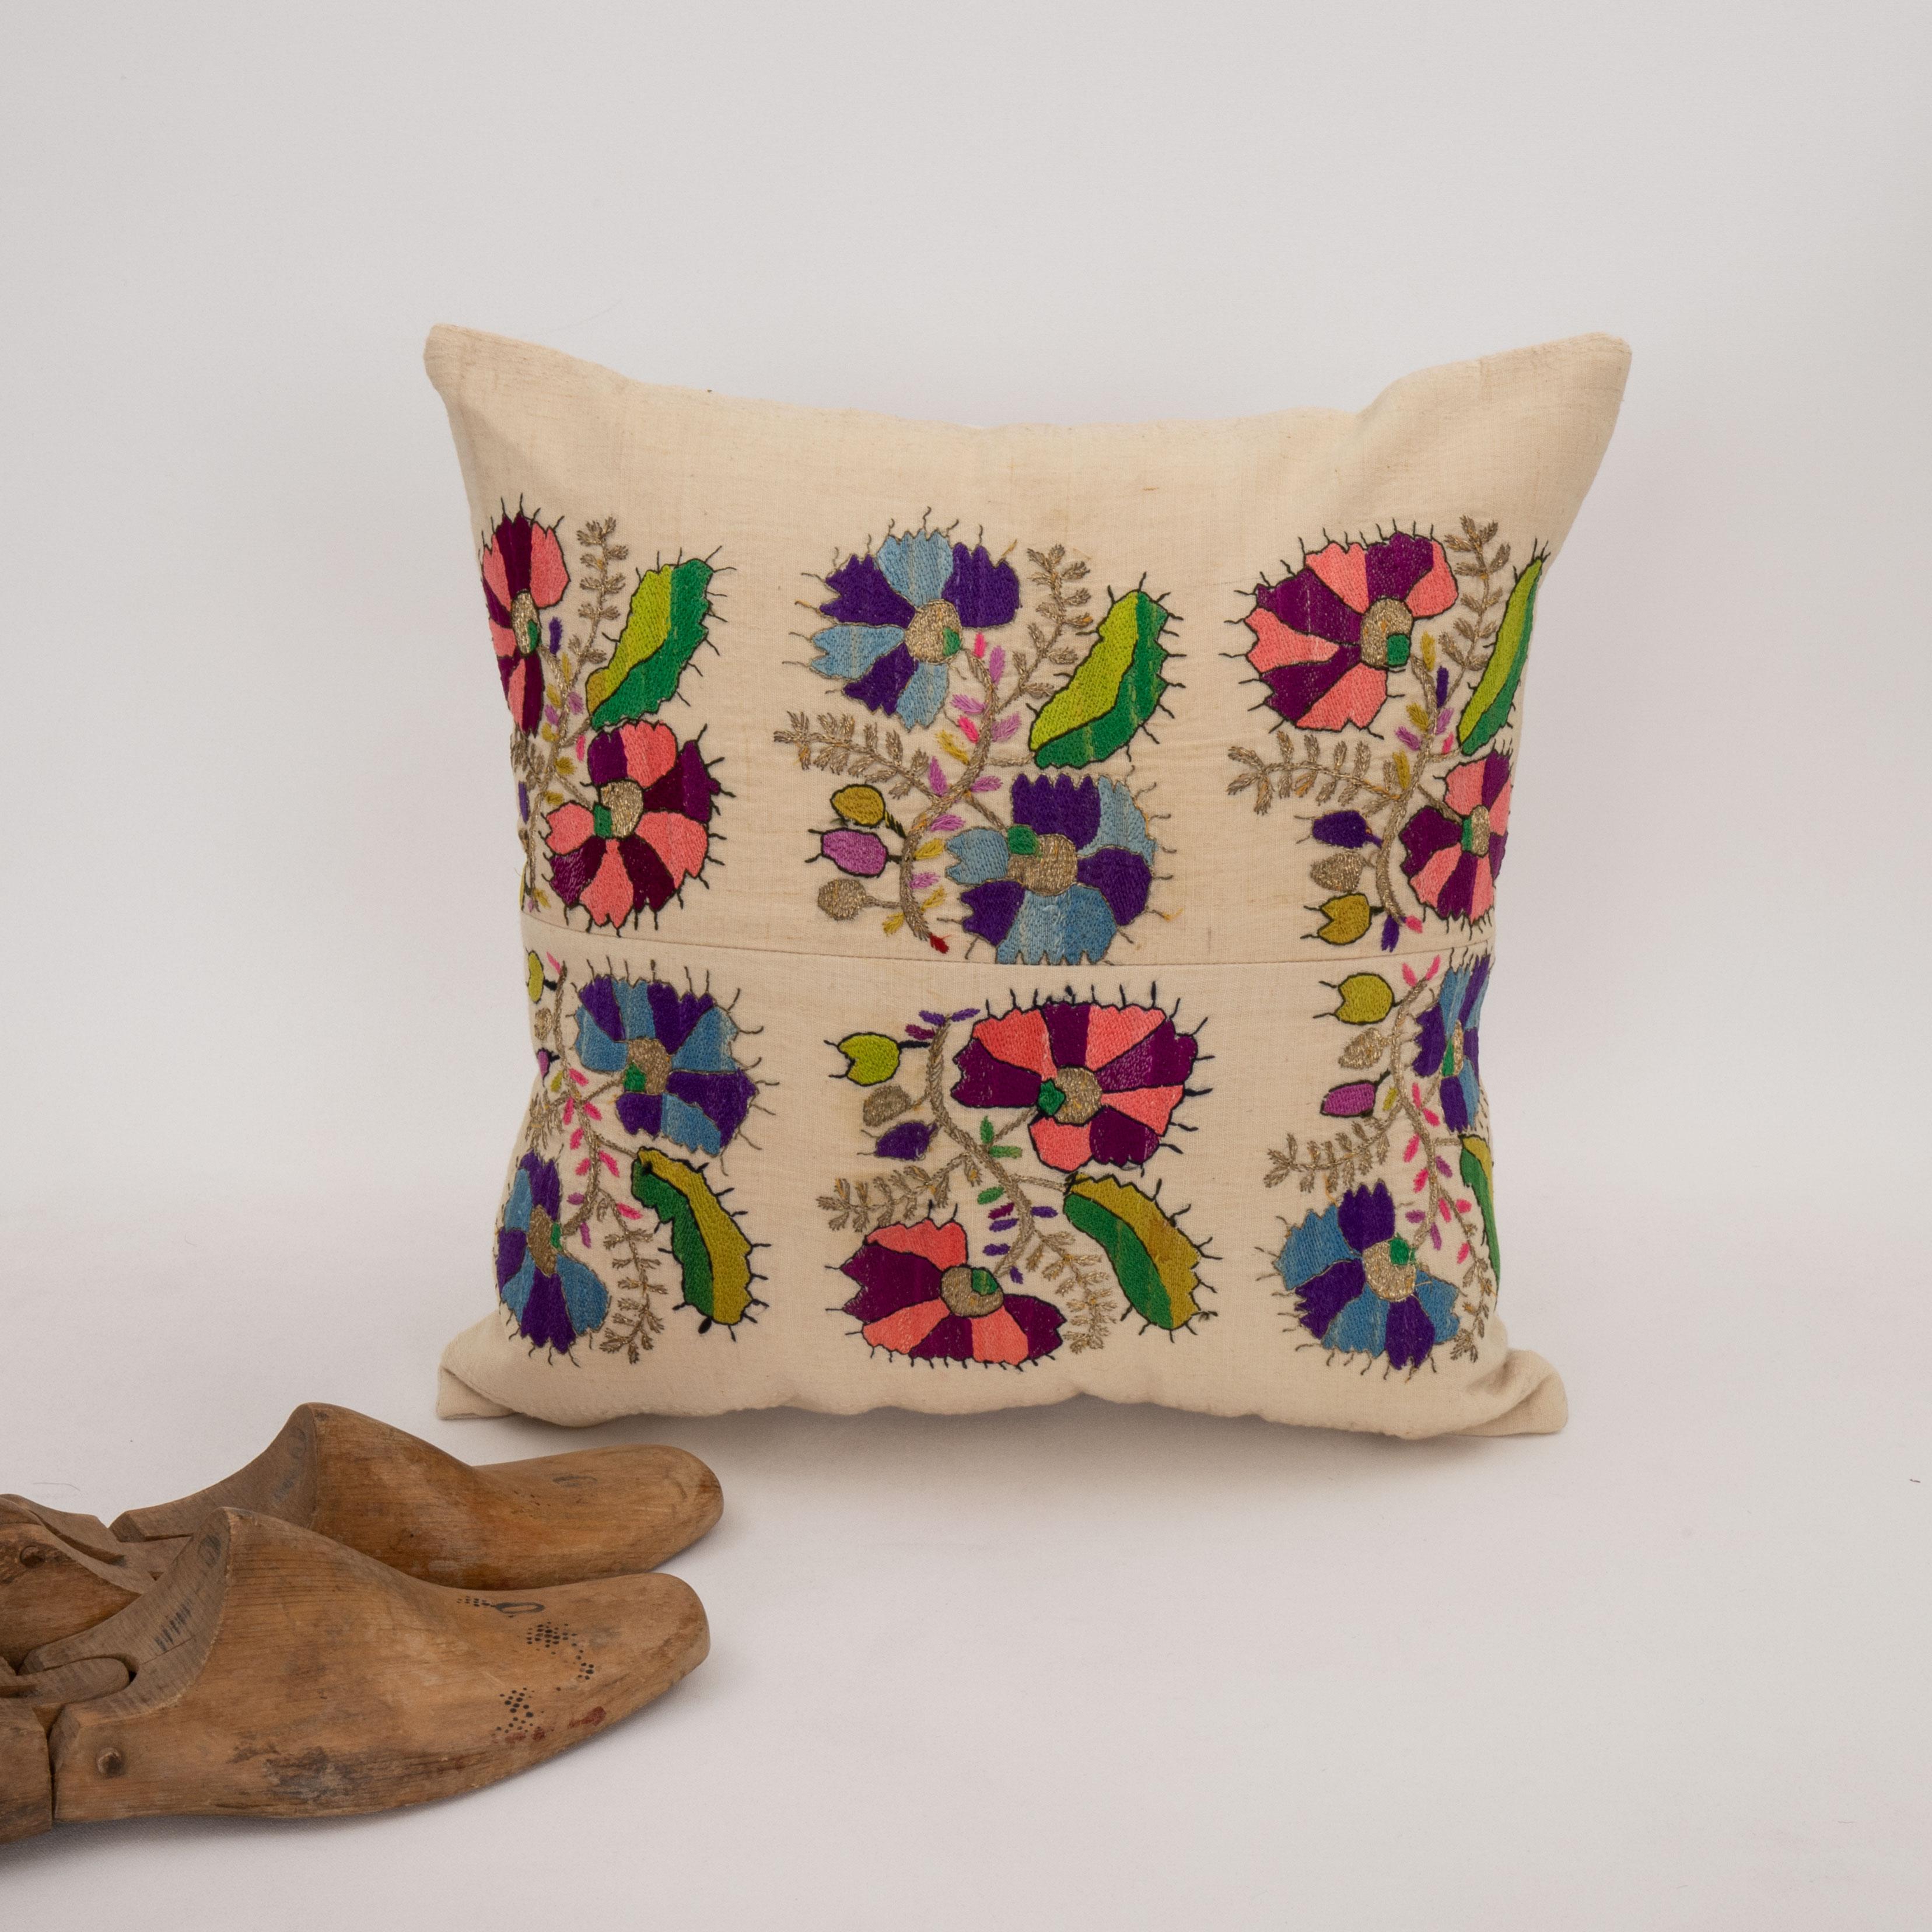 Embroidered Pillow Case Made from an Antique Ottoman Embroidery For Sale